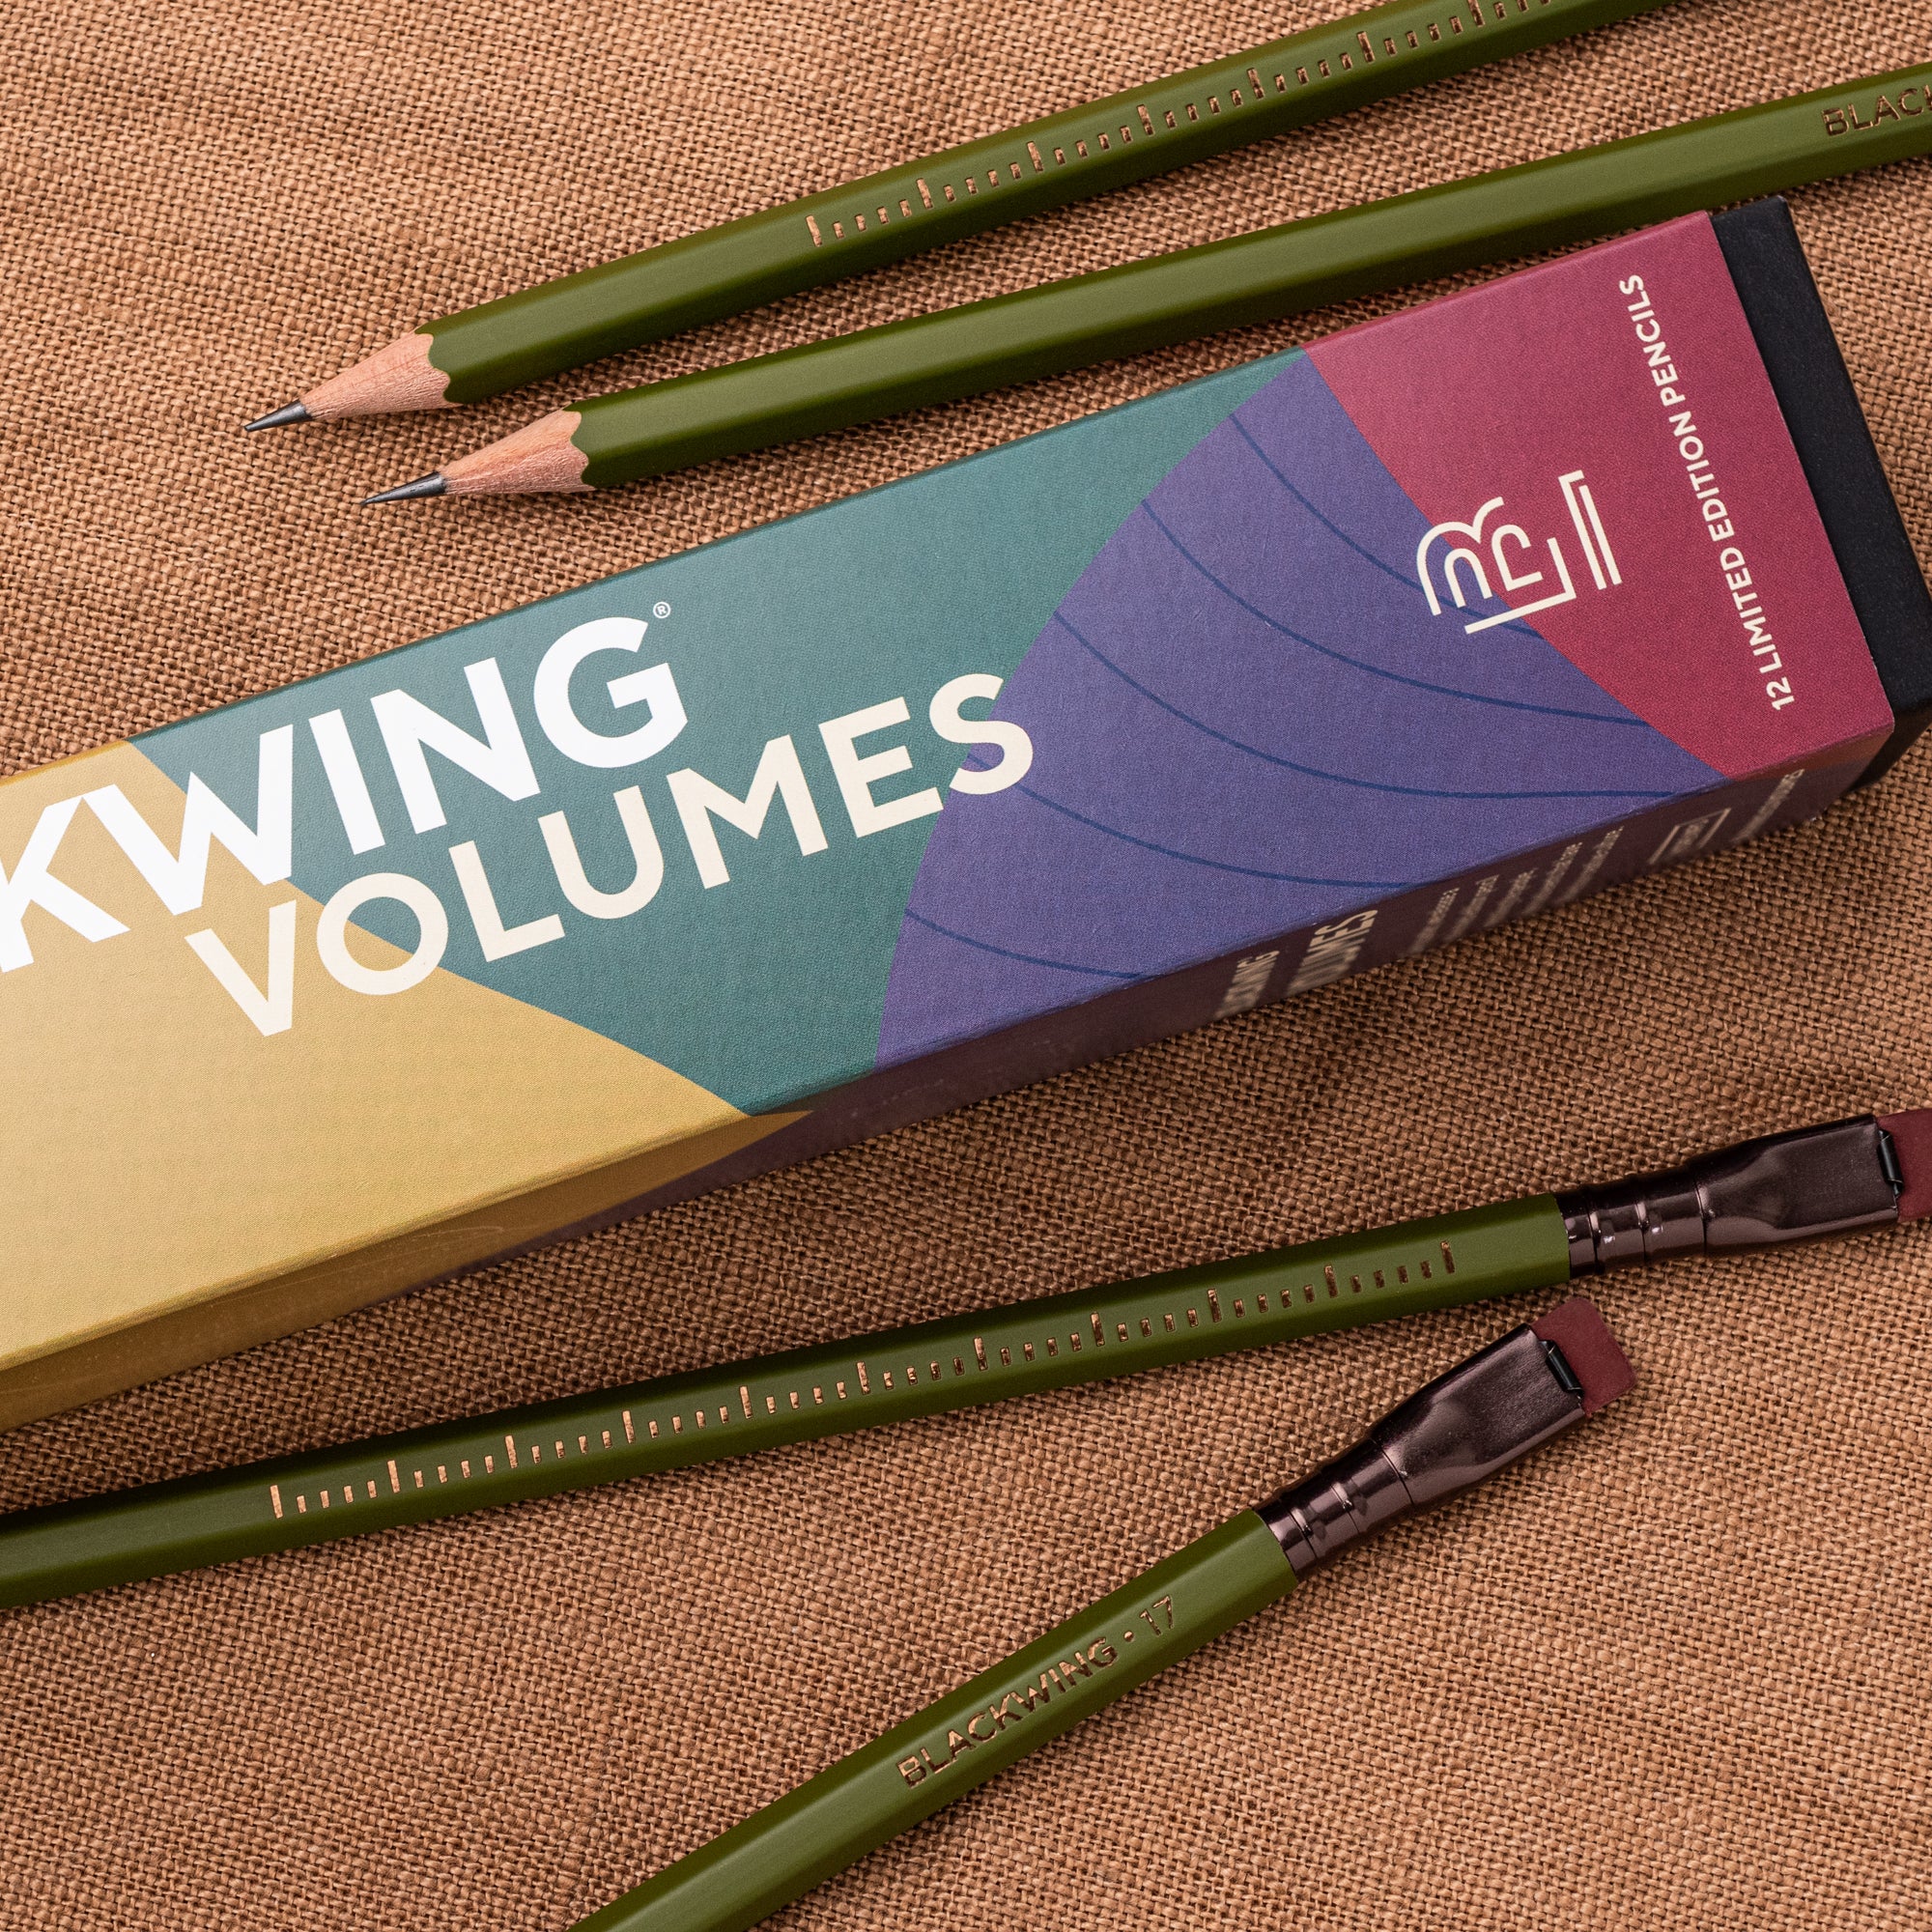 A Blackwing Volume 17 (Set of 12) next to a box of gardening pencils.